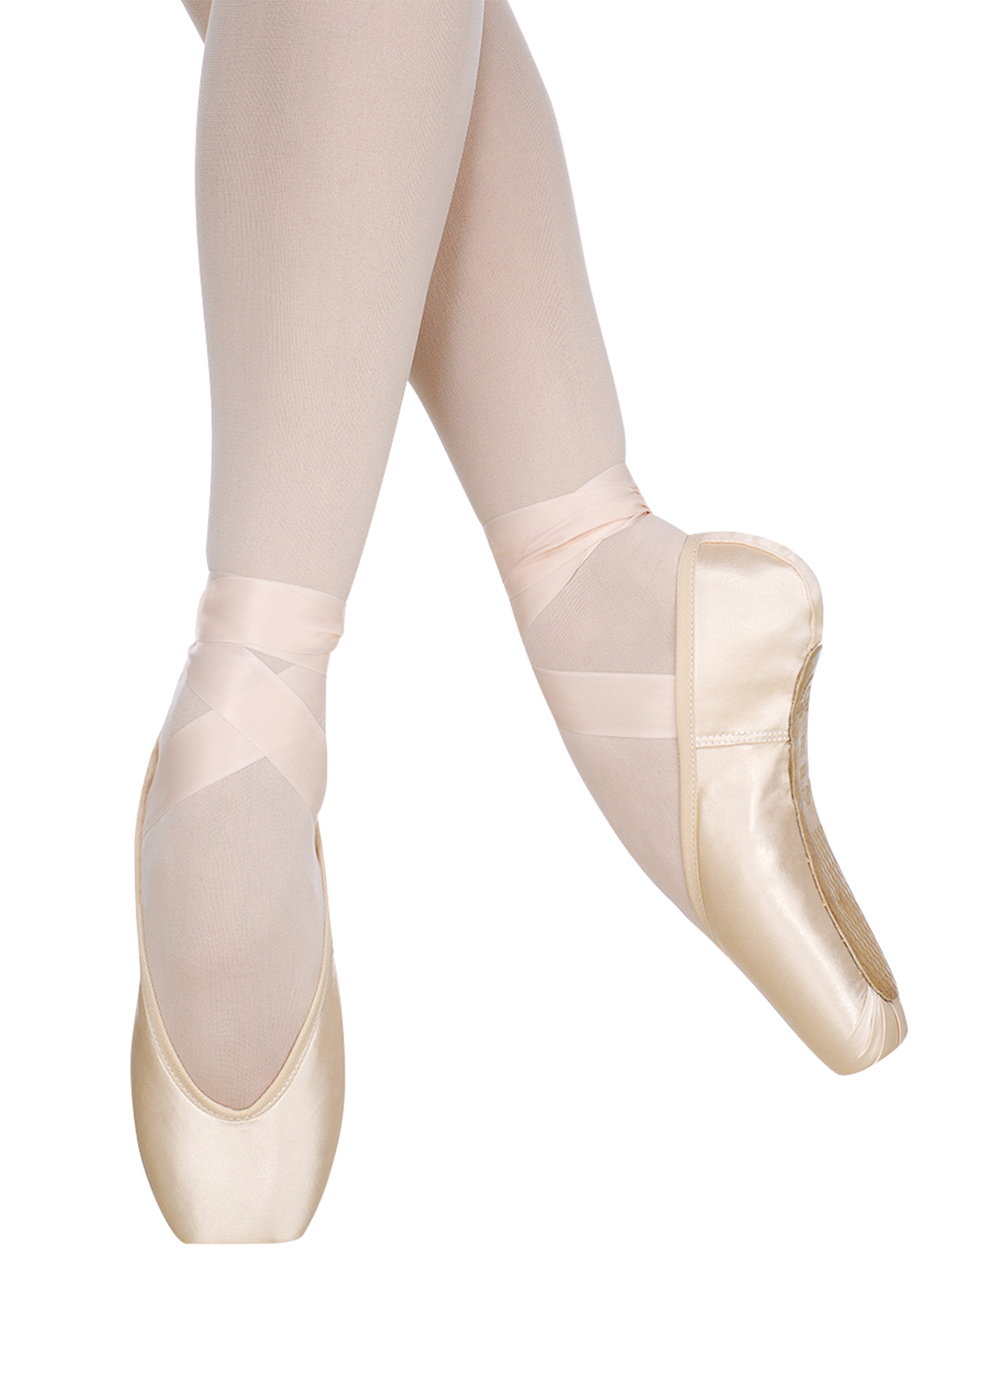 Grishko Pointe Shoes Size Chart